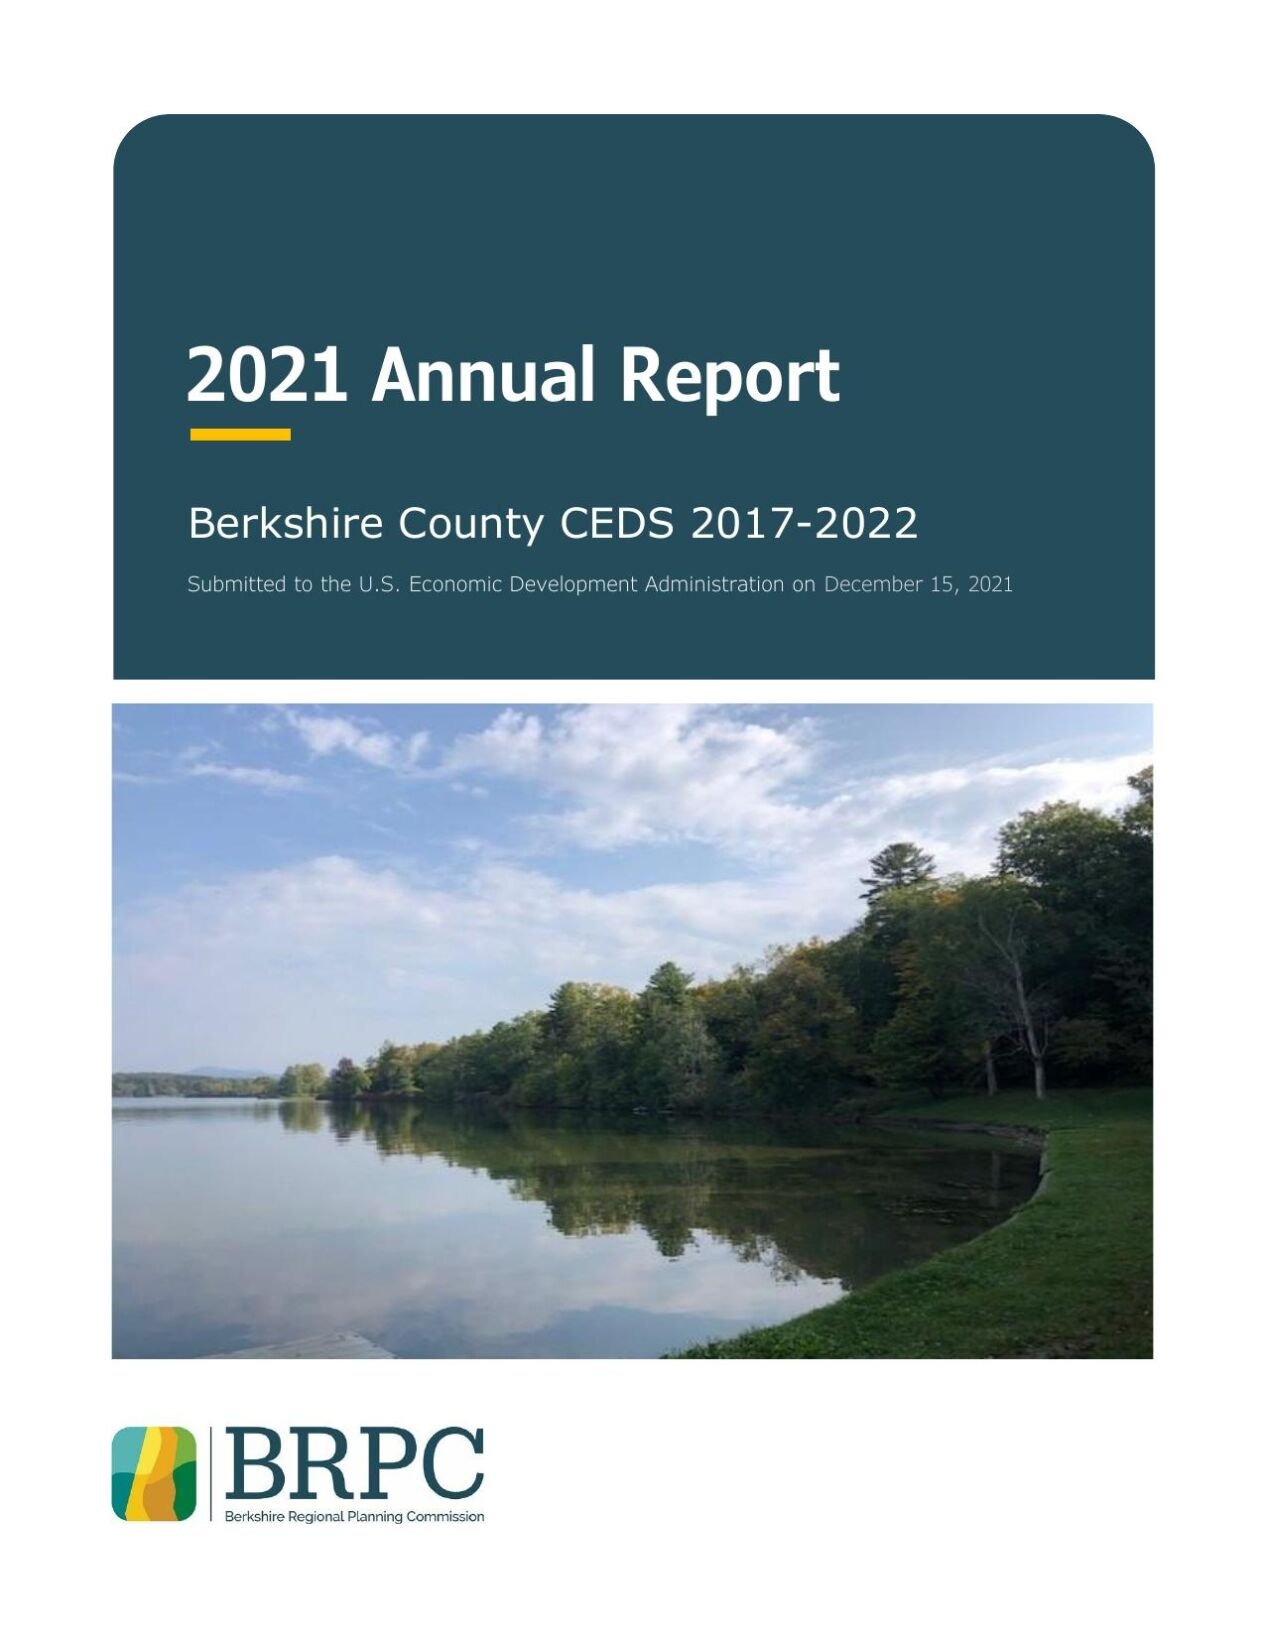 2021-Annual-Report-Berkshire-County-CEDS-2017-2022_final.pdf